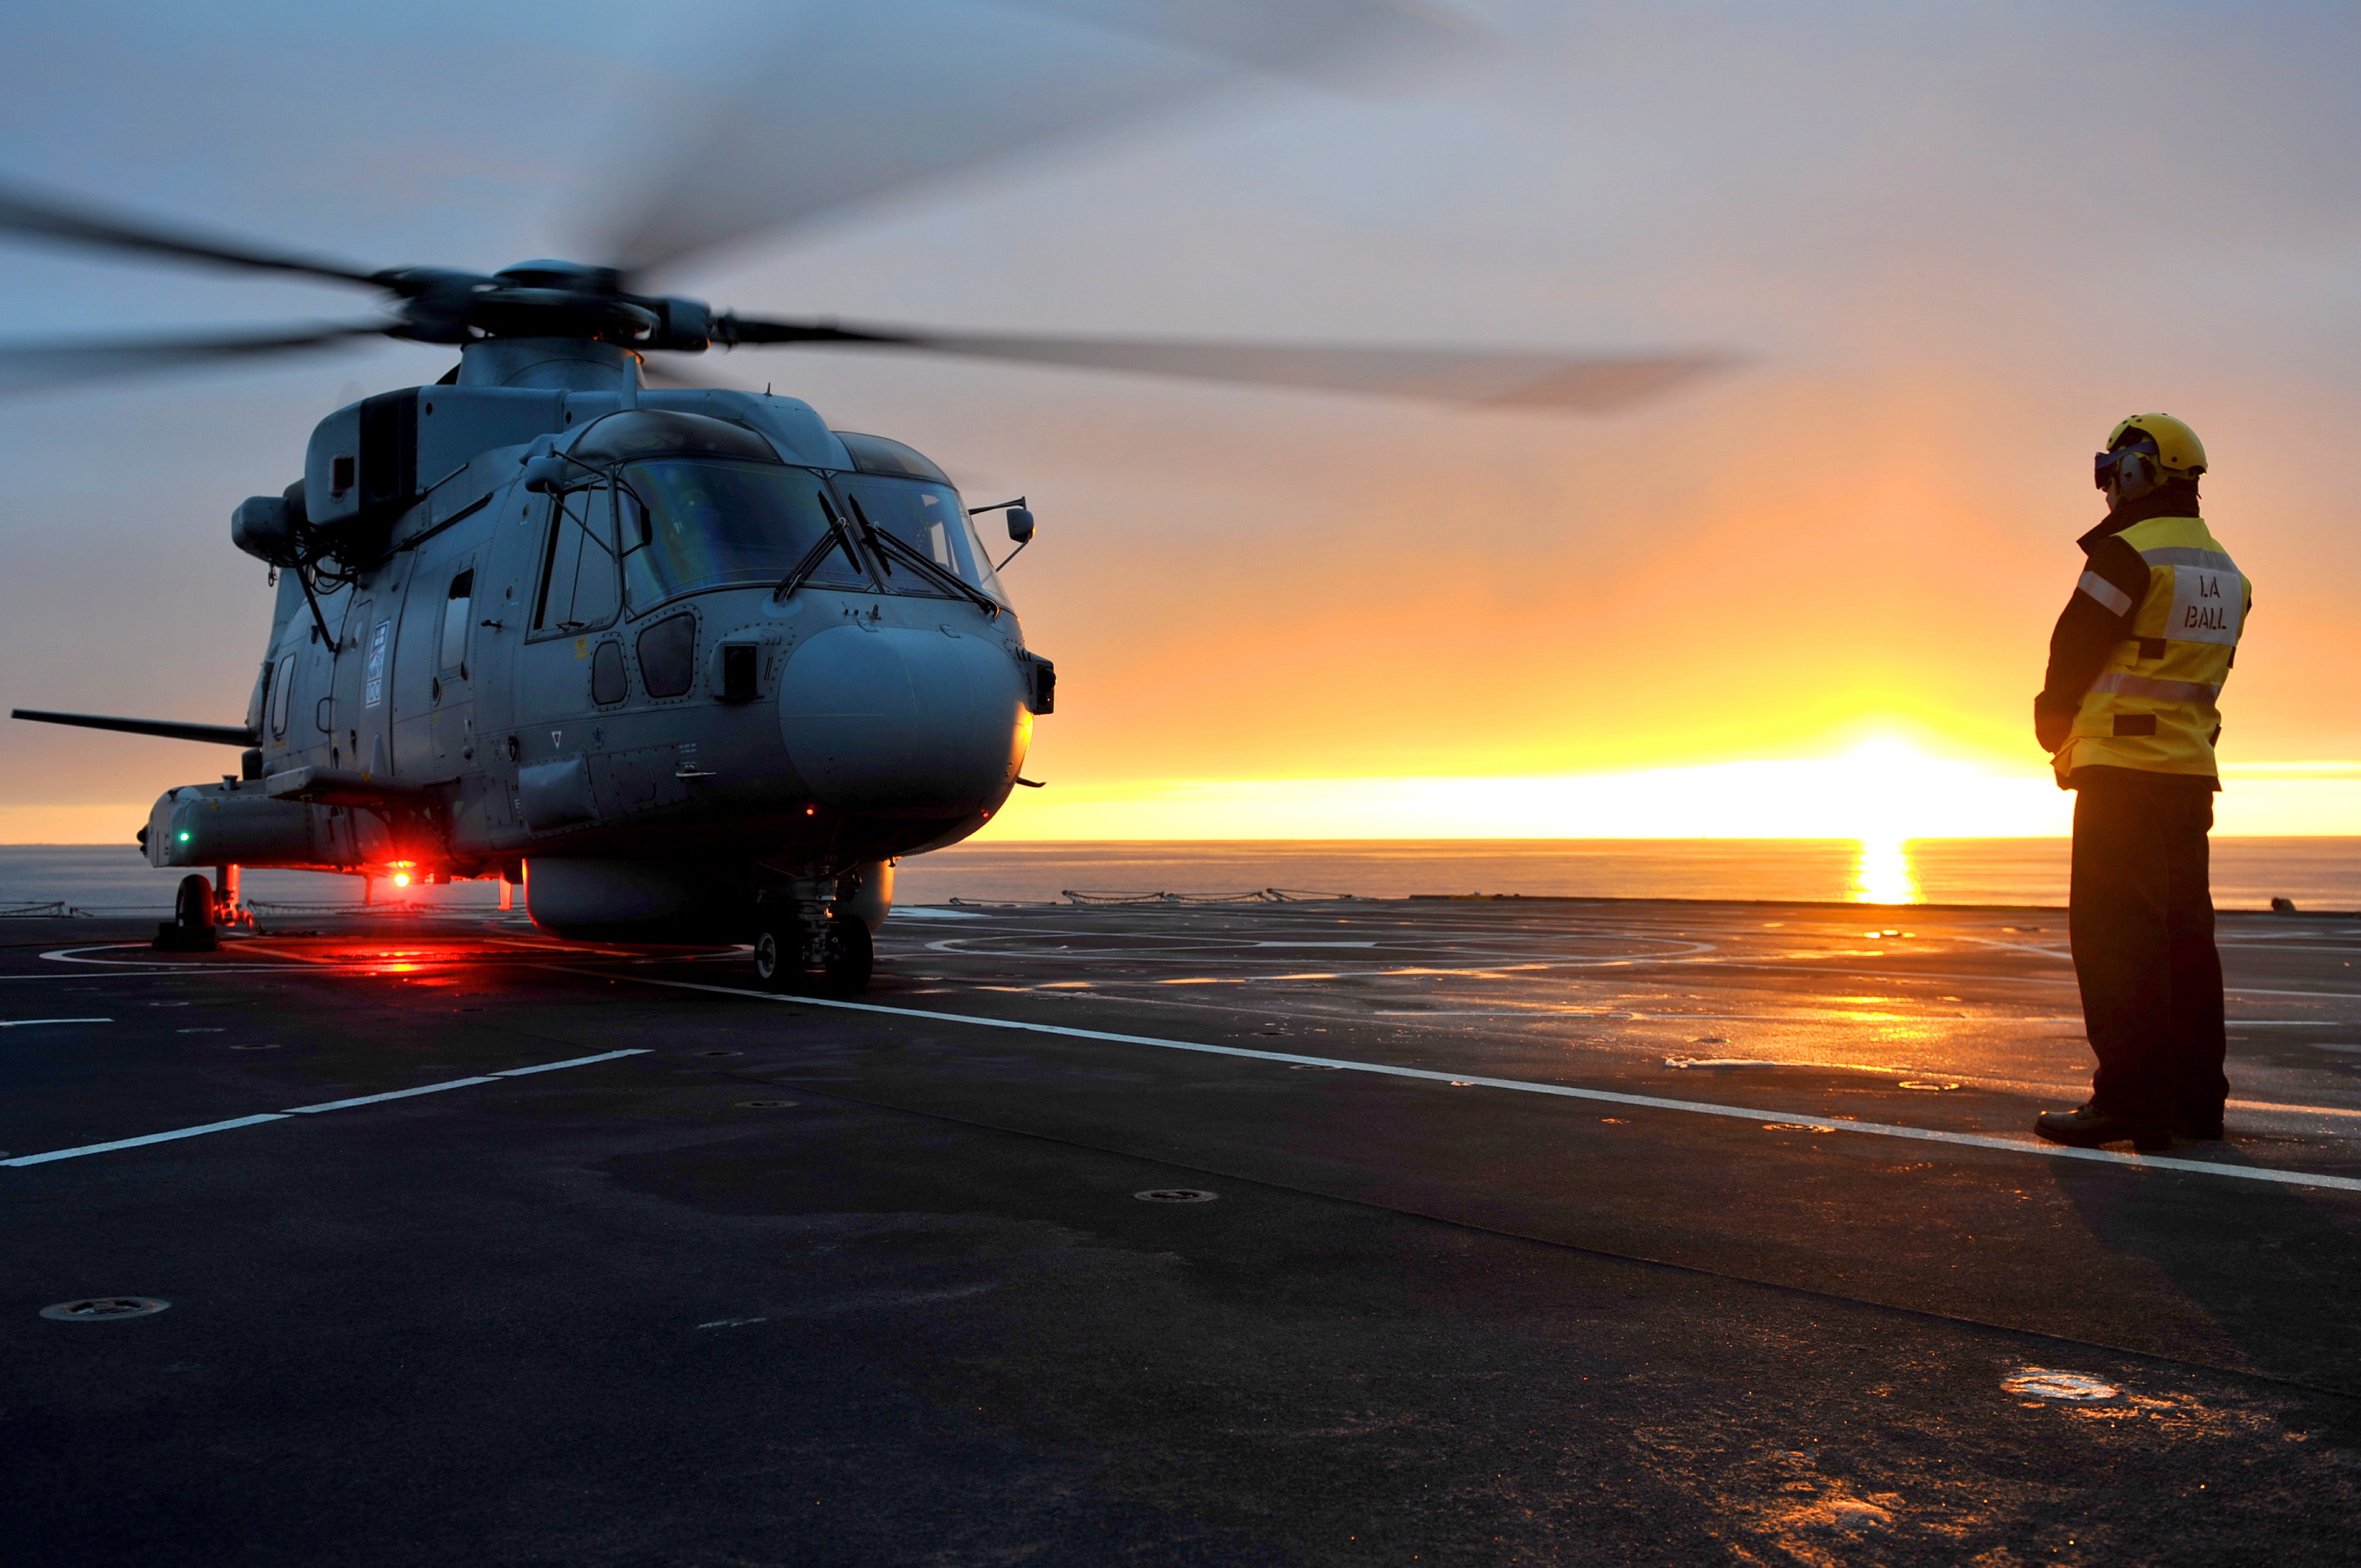 Royal Navy Merlin Helicopter Prepares to Takeoff from RFA Argus MOD 45153599